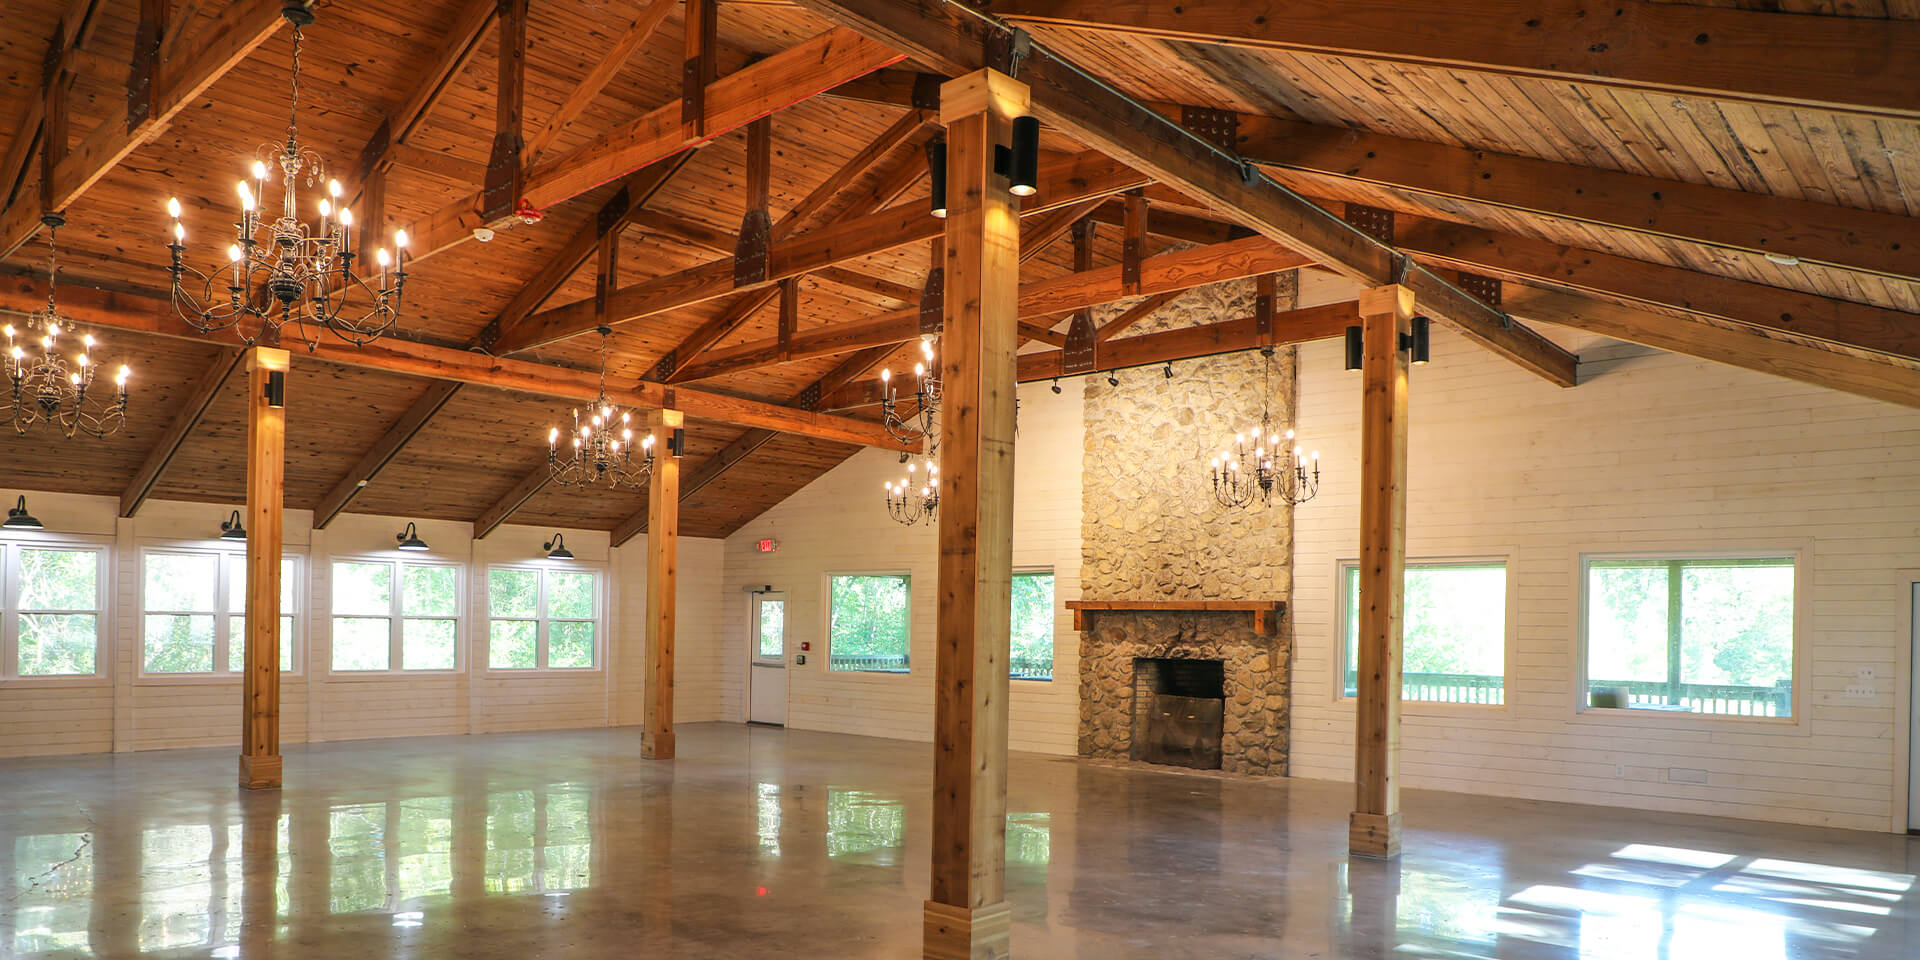 The original pine ceiling doesn’t only reflect the Lodge’s history, but also its charm.